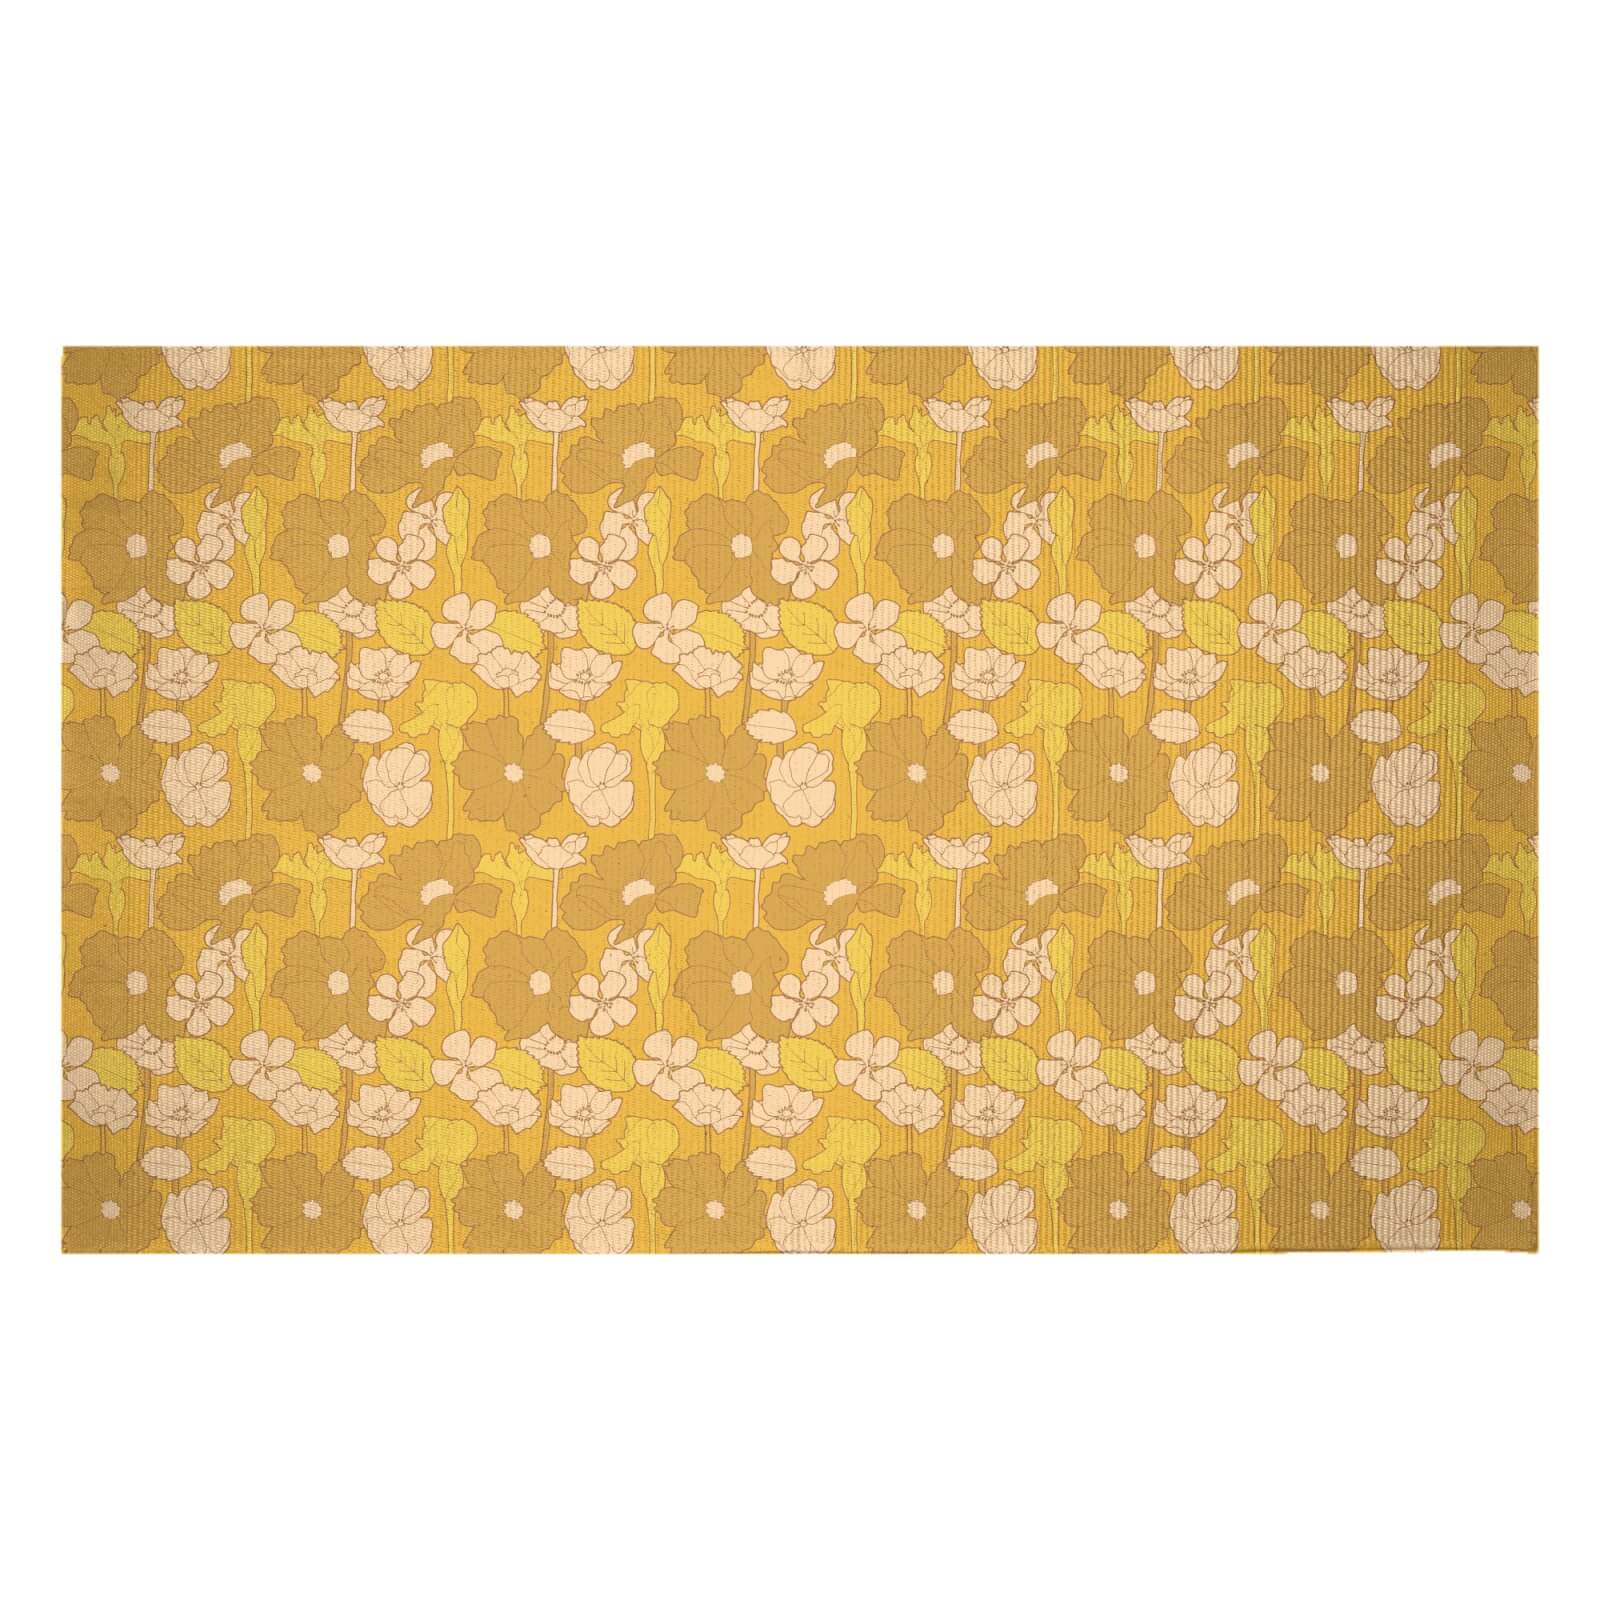 Decorsome 60S Floral Wallpaper Woven Rug - Small